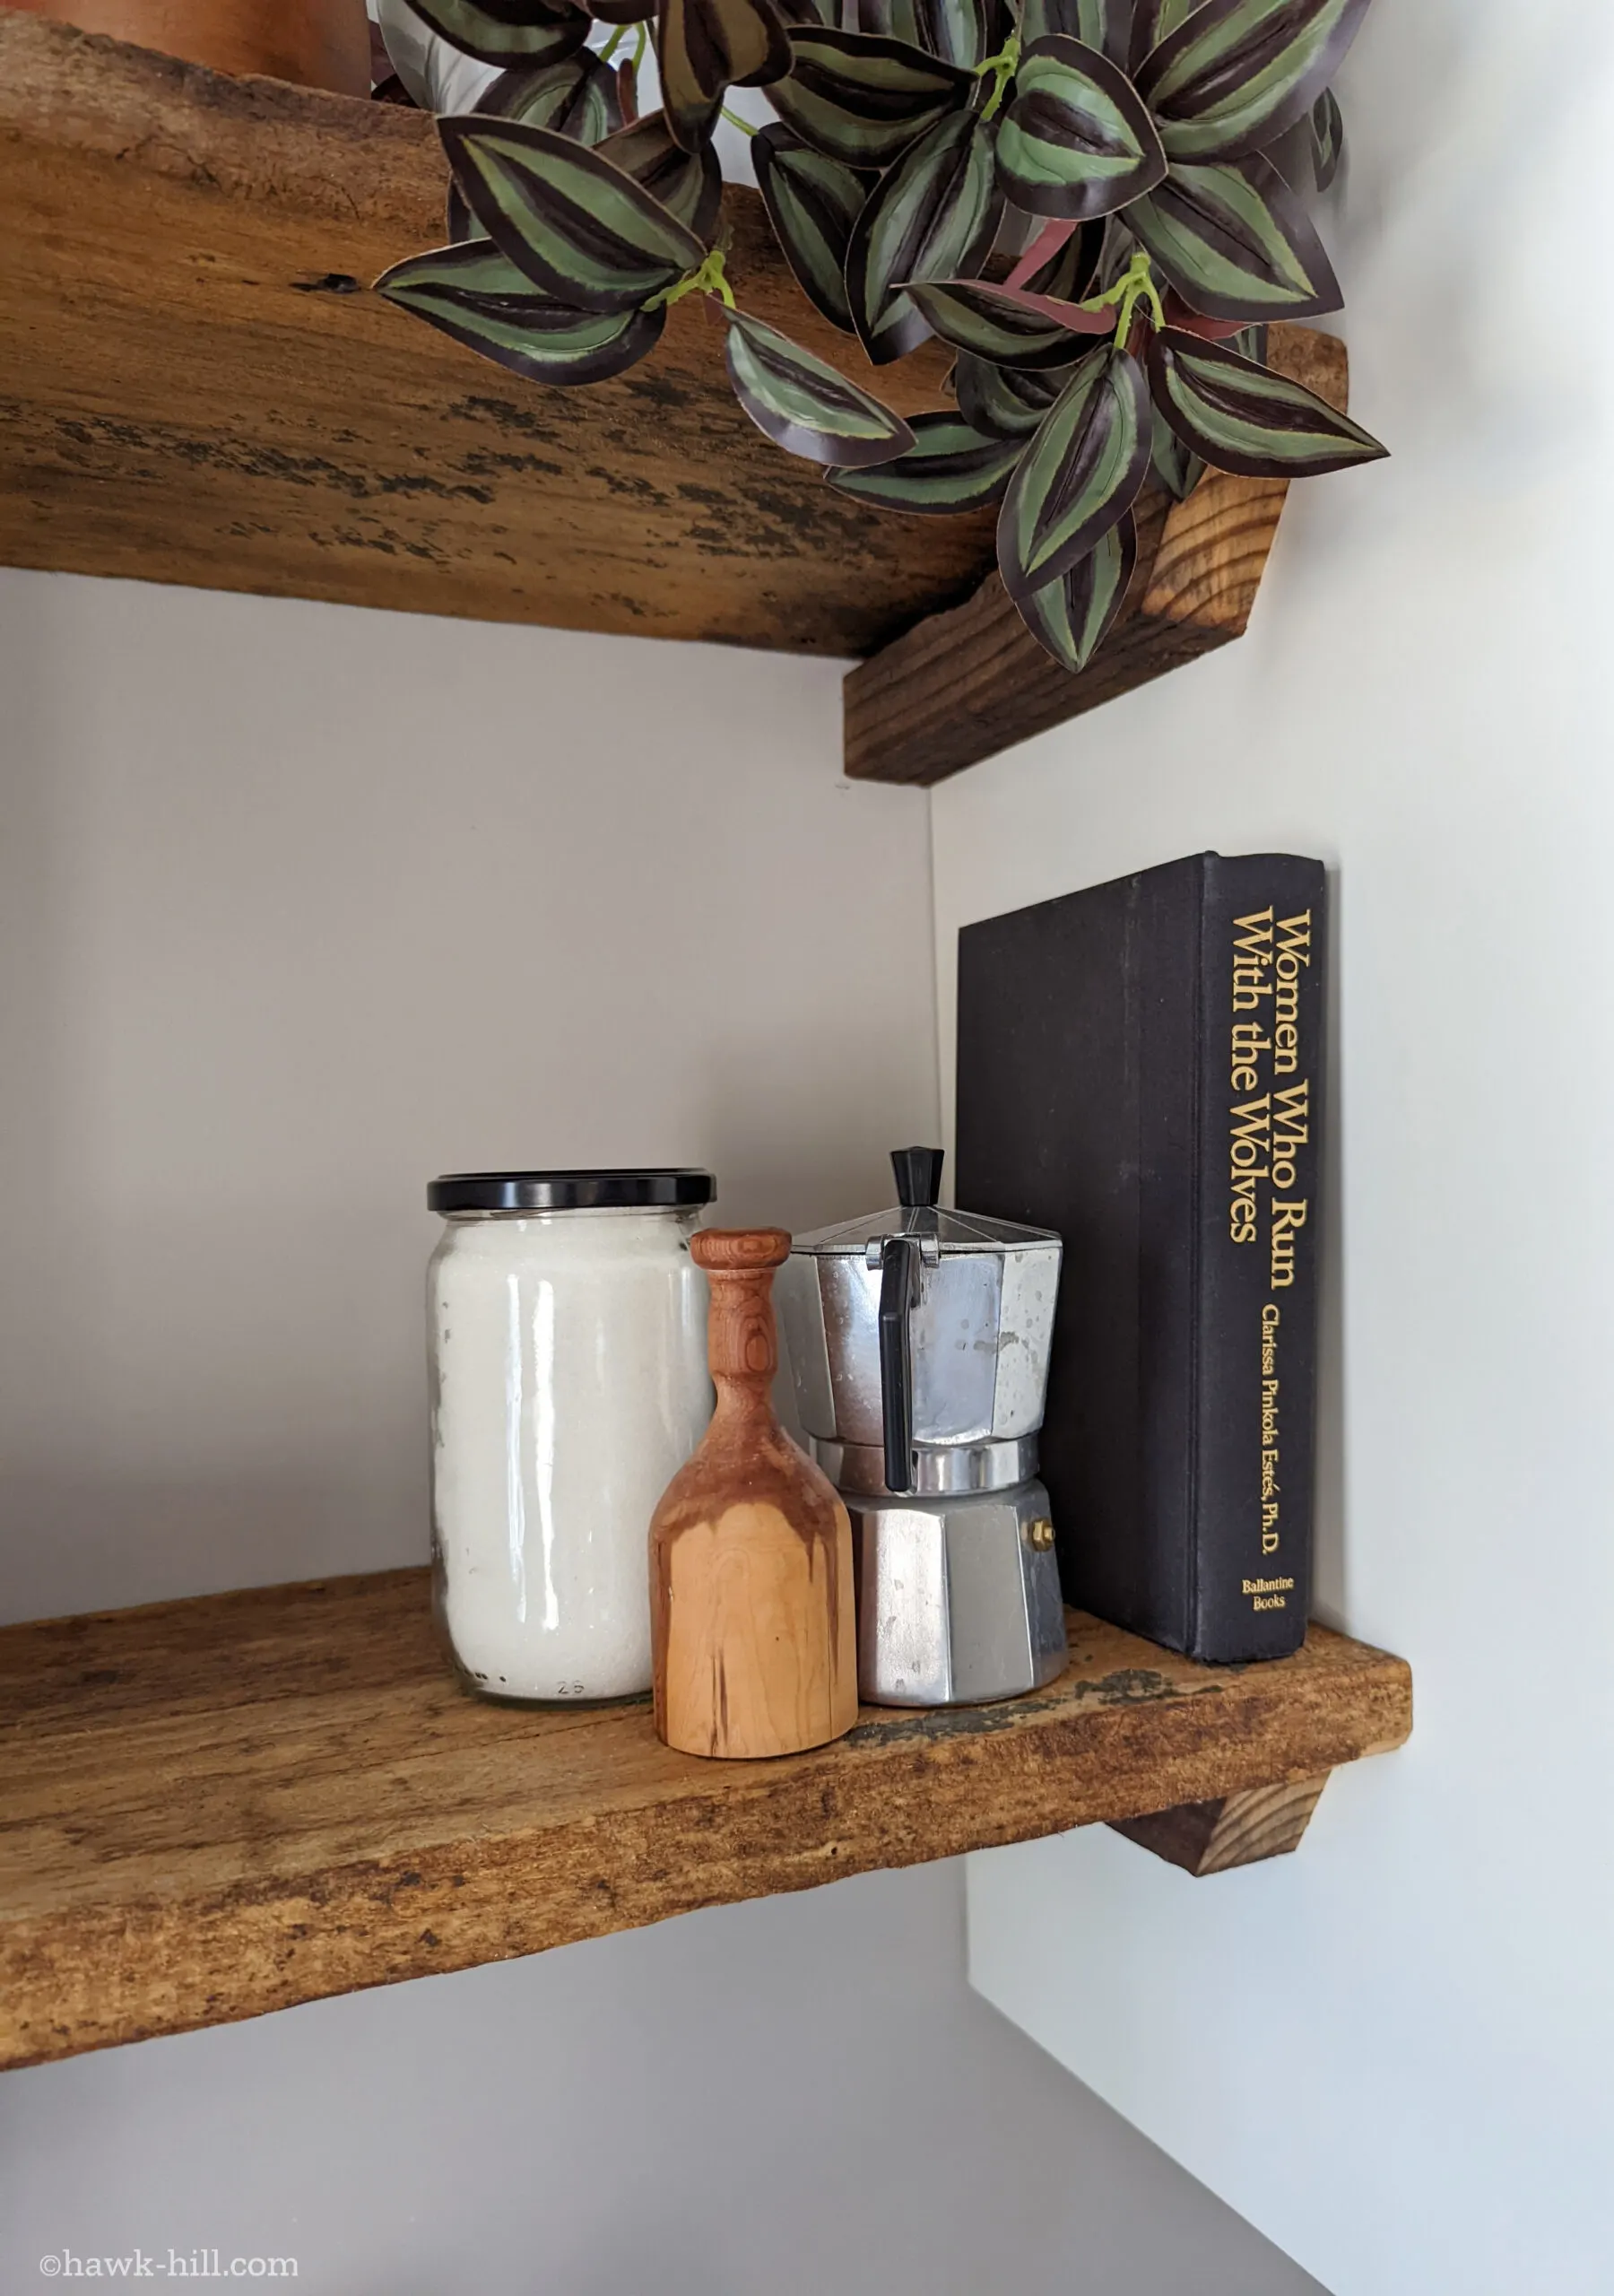 Items displayed on a set of open kitchen shelves made from reclaimed floor joists.